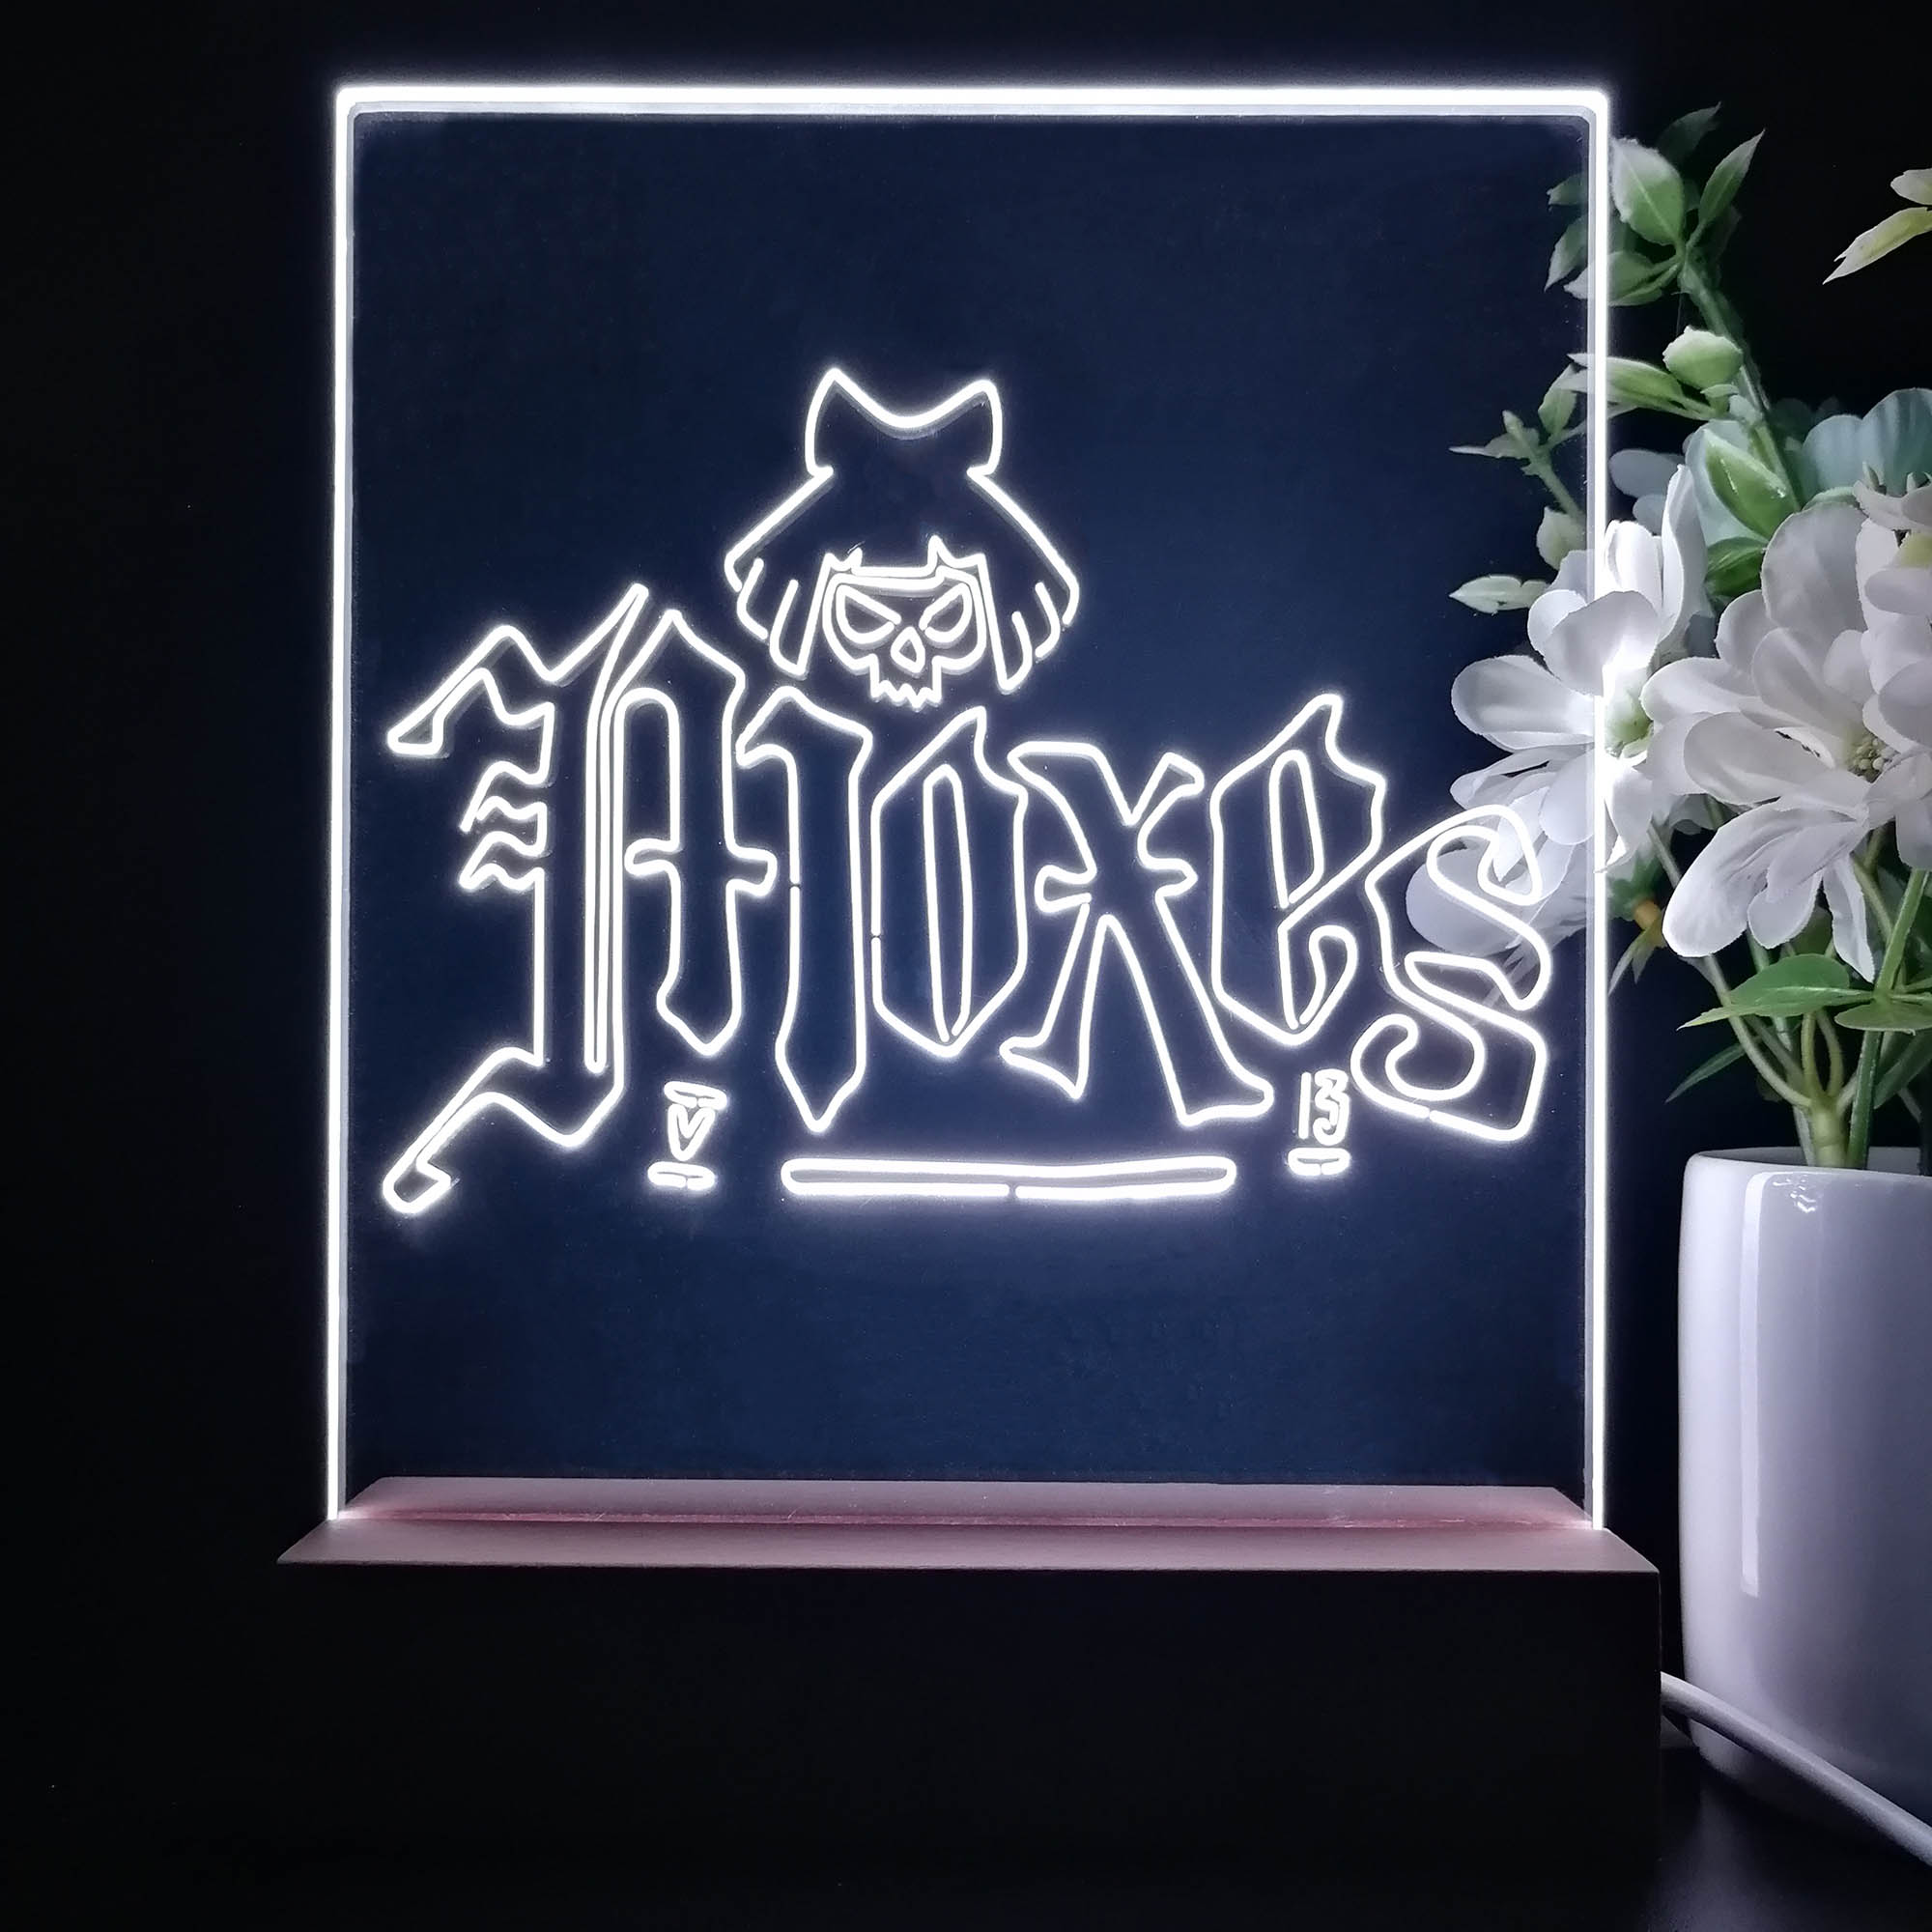 Cyberpunk 2077 Moxes Game Room LED Sign Lamp Display